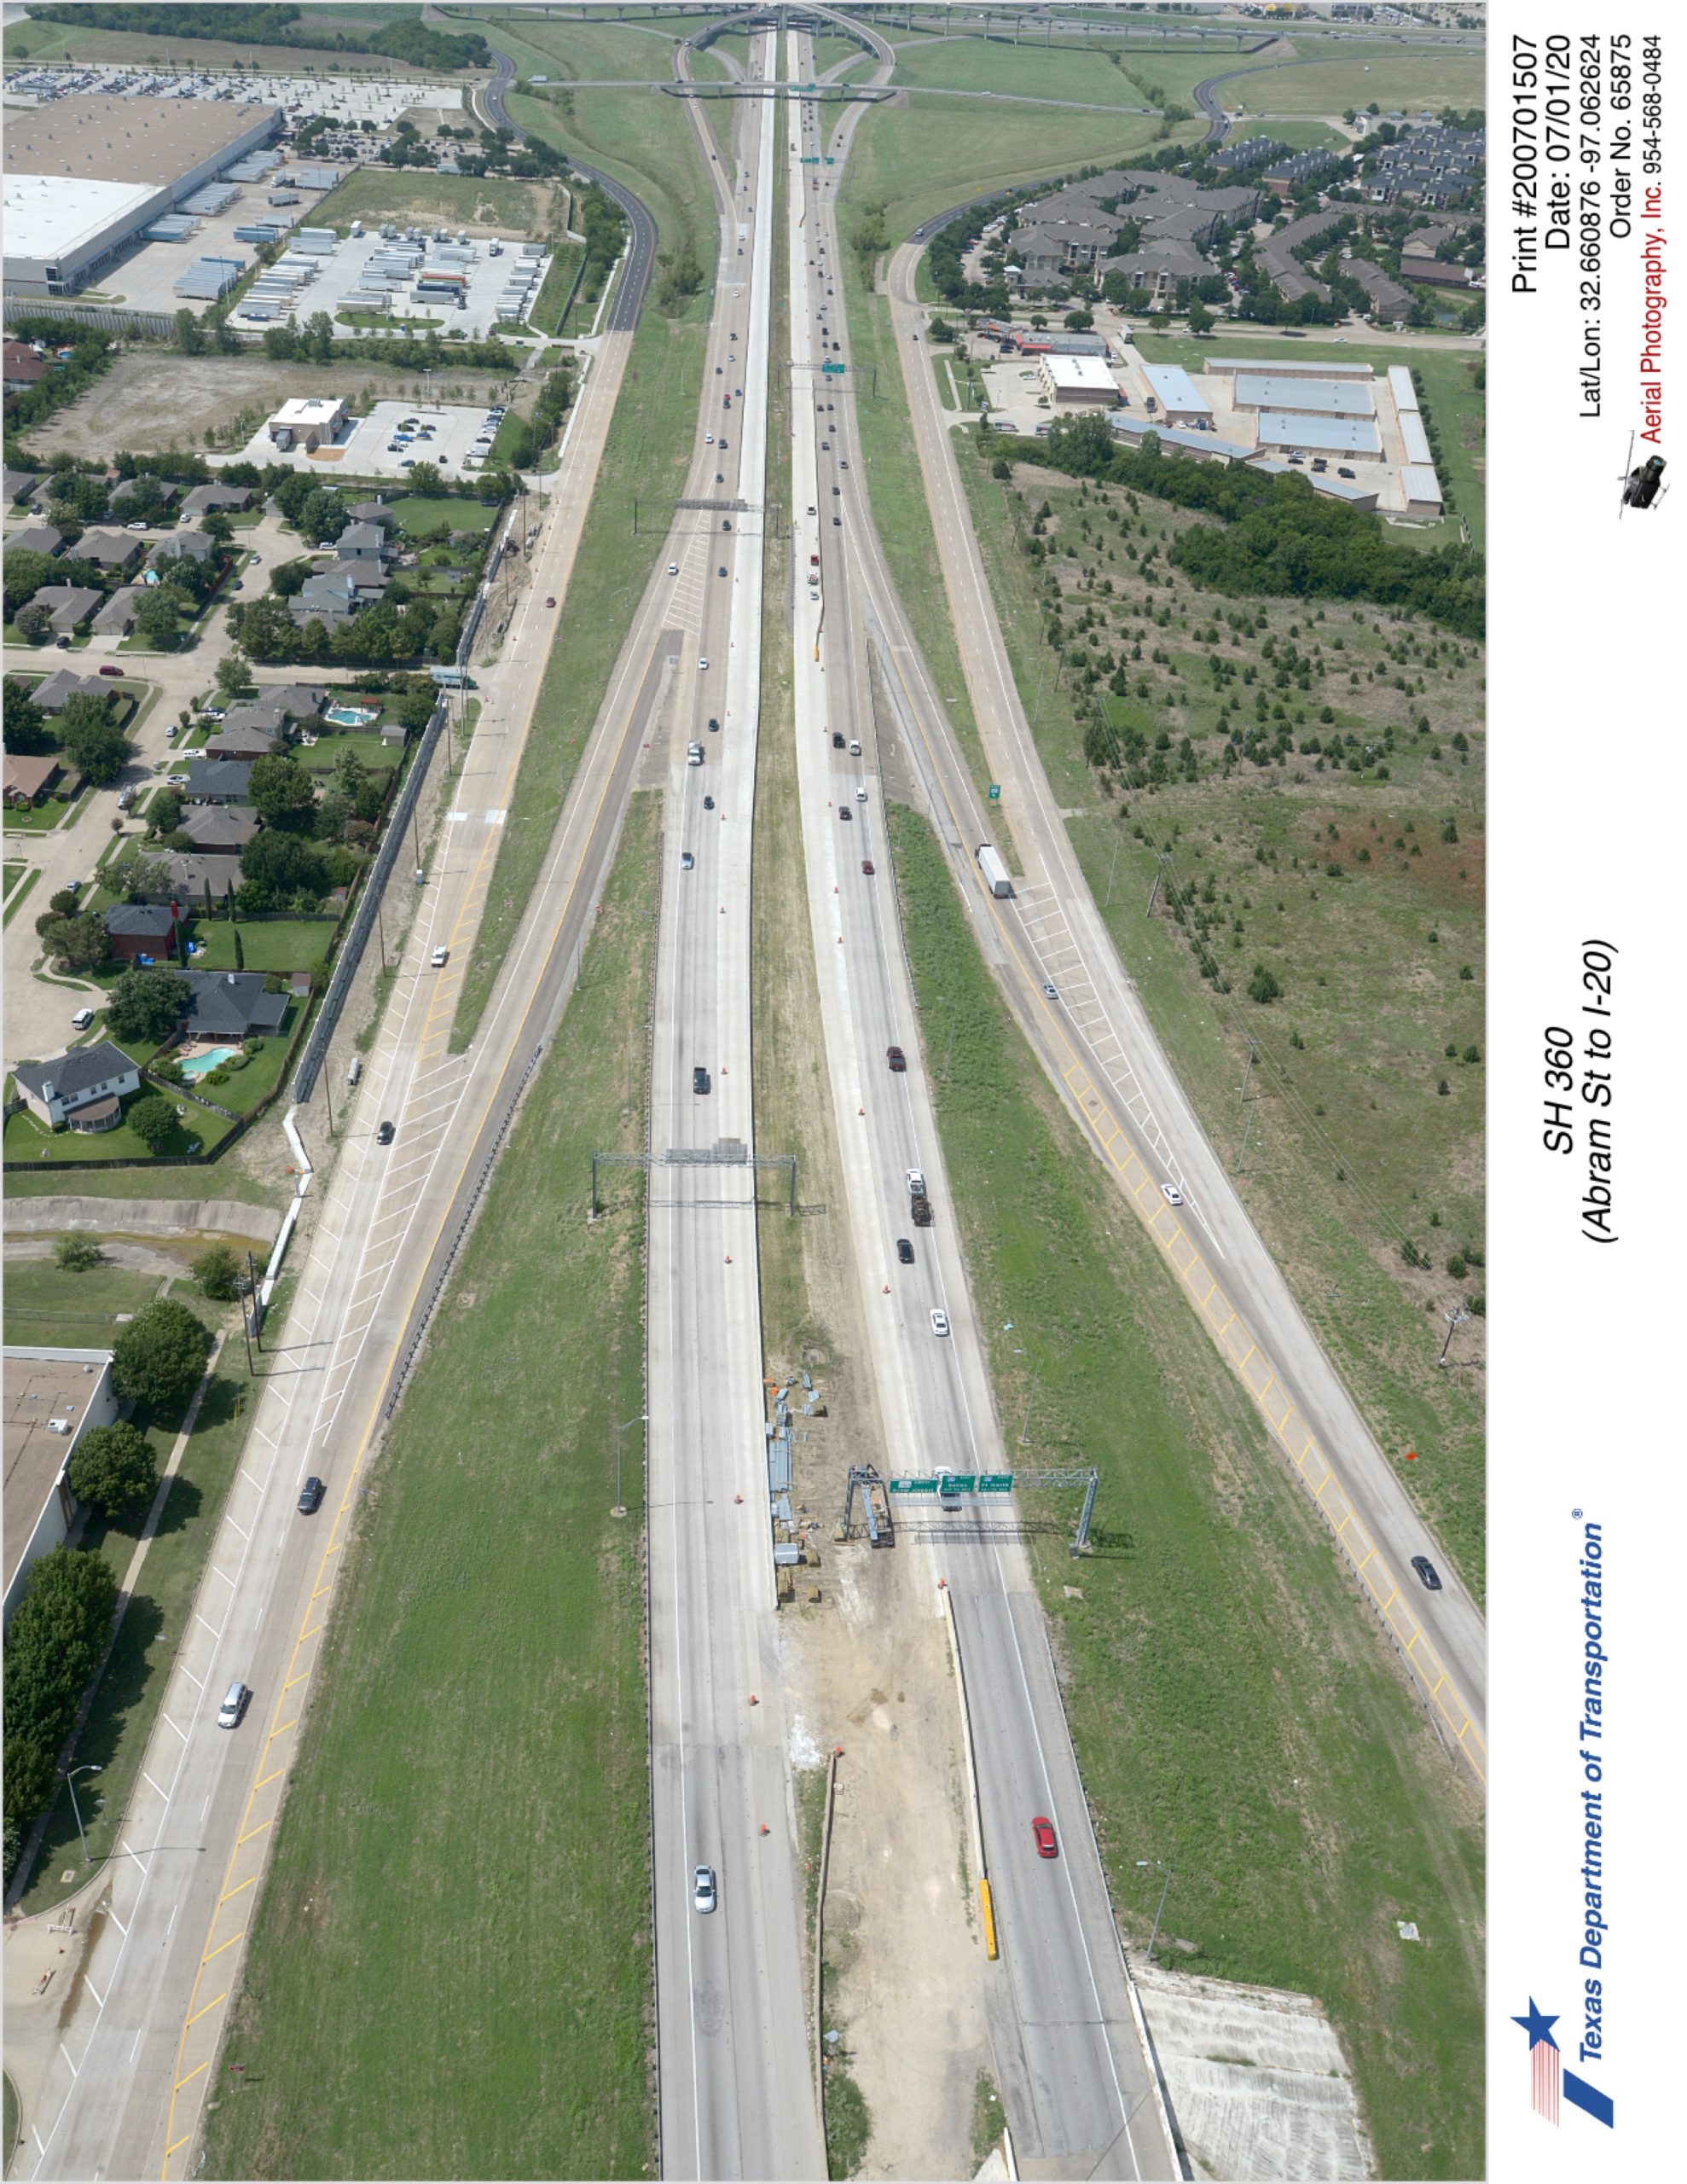 Looking north over SH 360/Kingswood Blvd. Completed interior widening from access ramps to north shown.